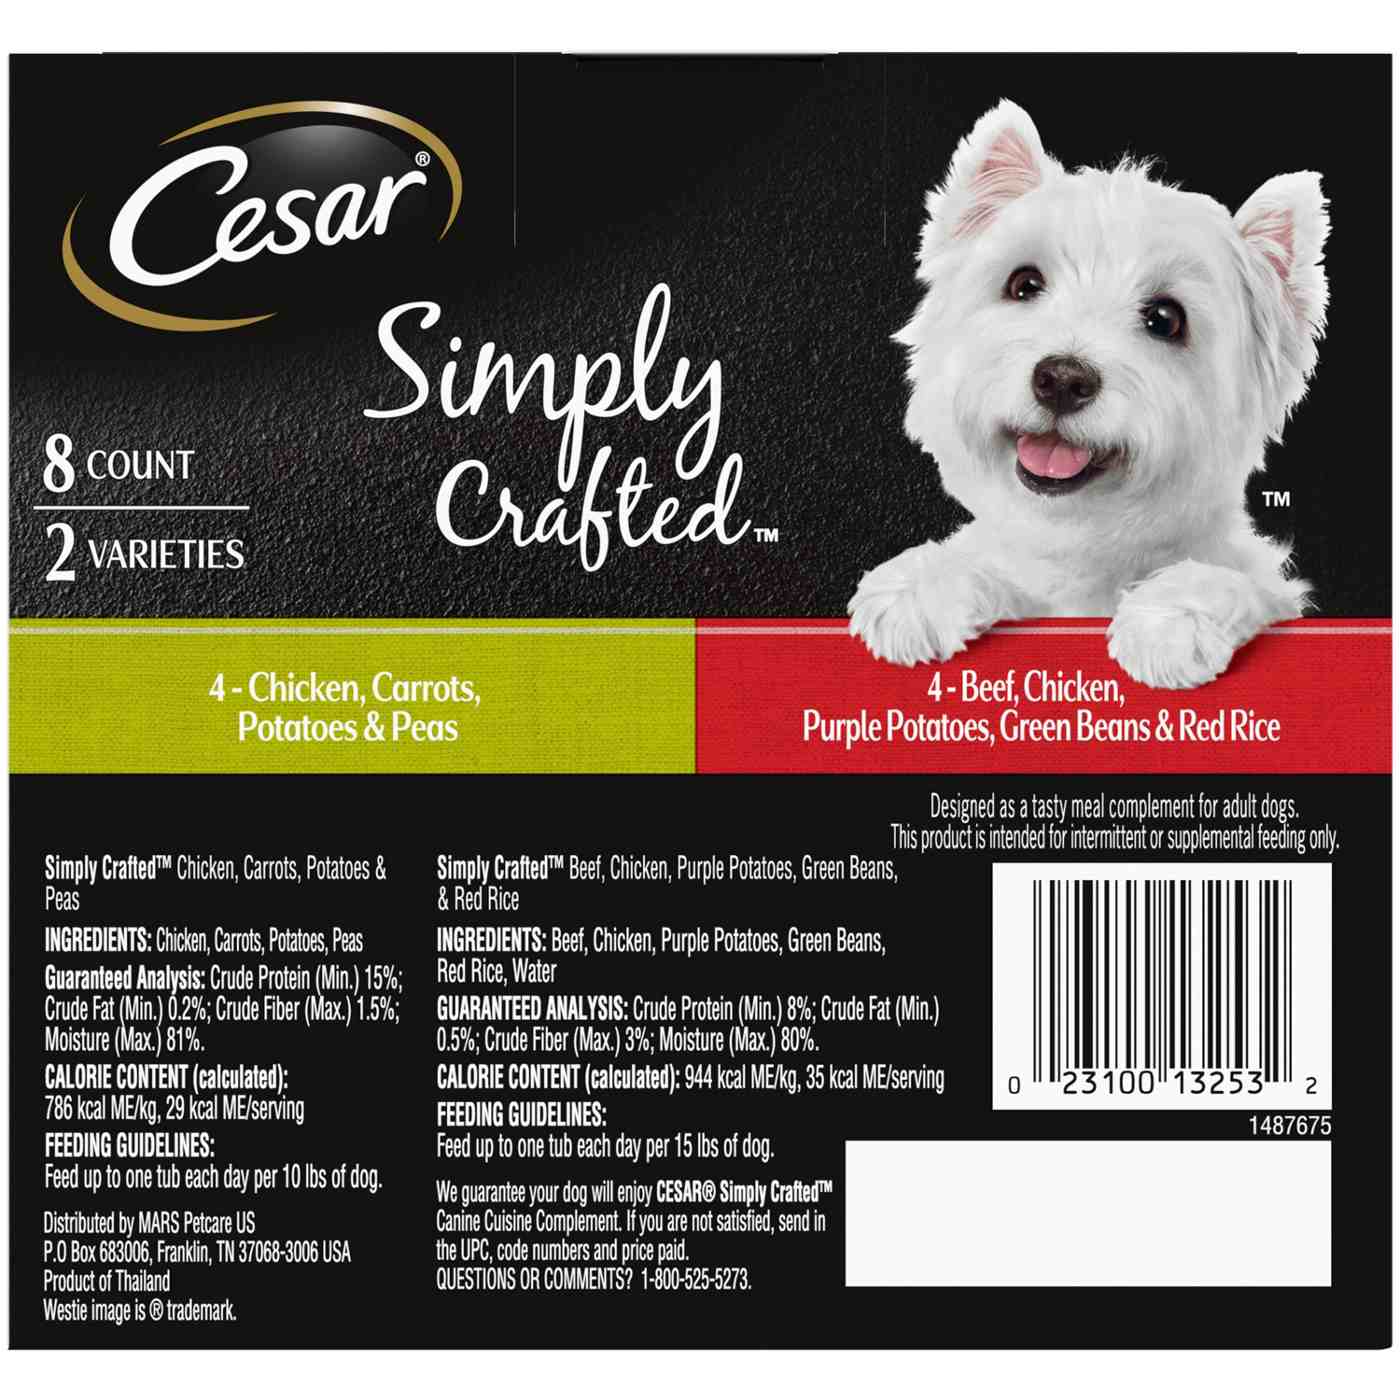 Cesar Simply Crafted Chicken & Beef Wet Dog Food Variety Pack; image 4 of 5